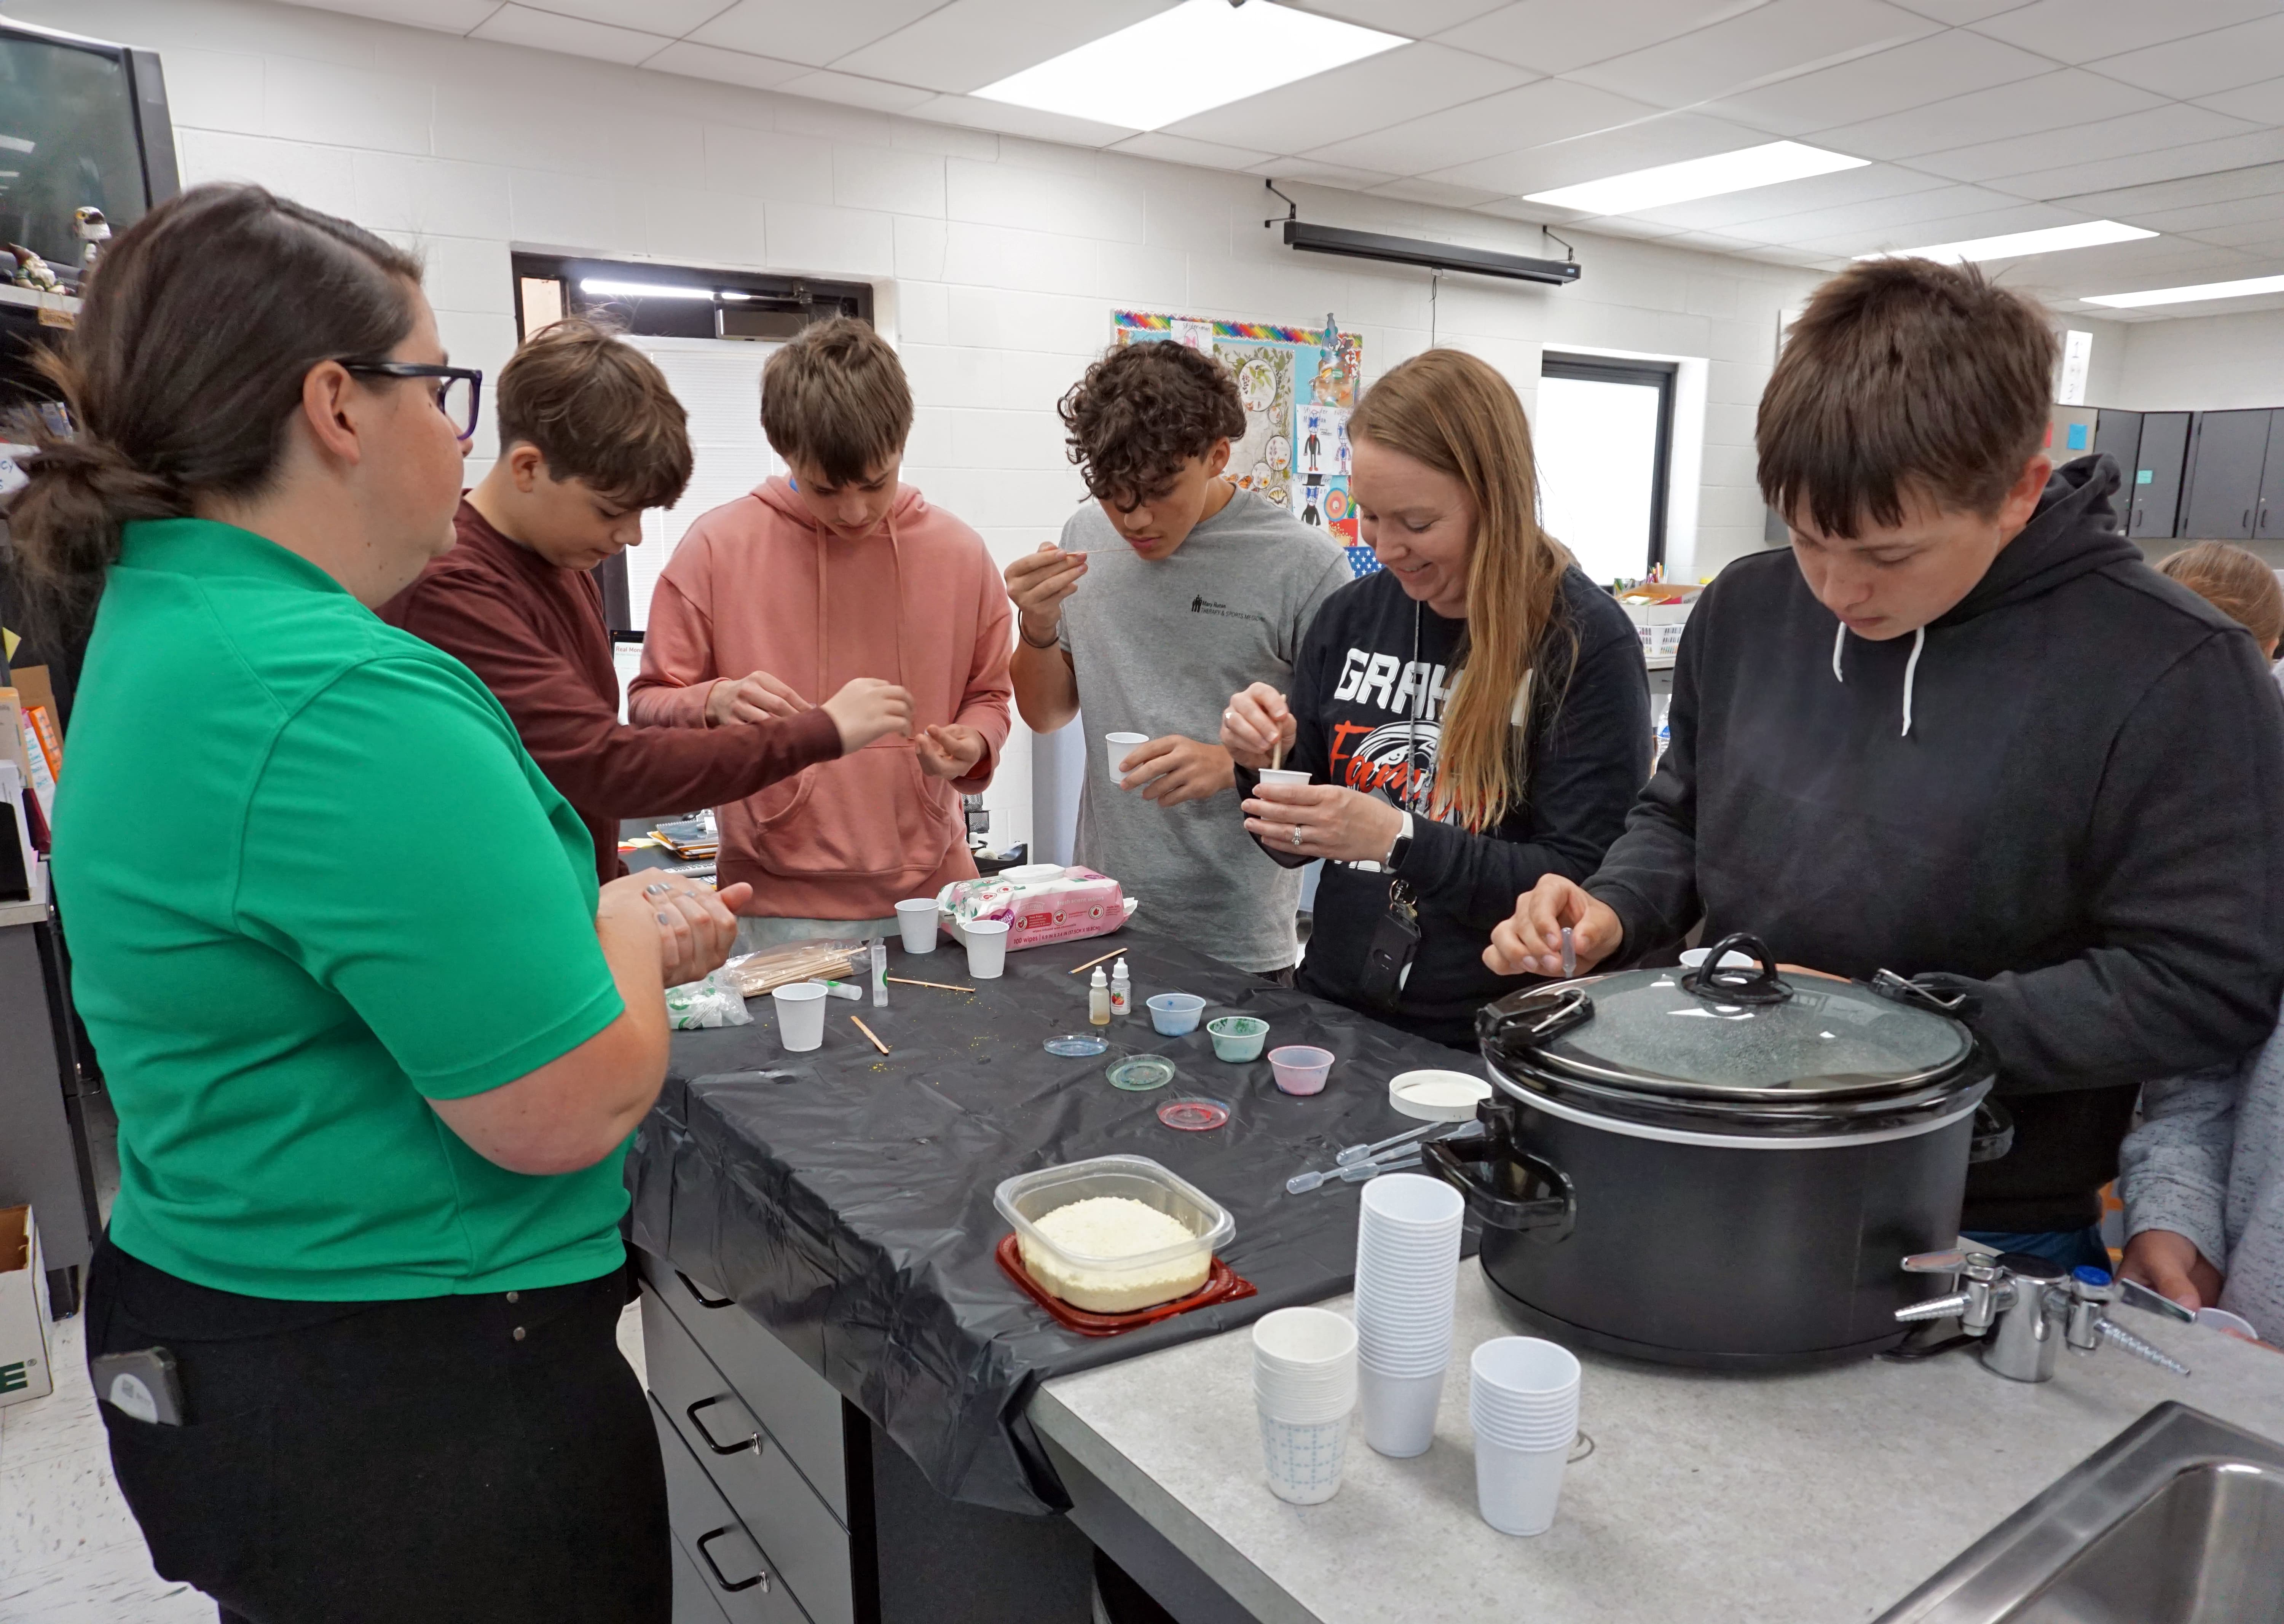 “As a STEM educator, I try to connect learning to authentic community opportunities. This was a real way to add the technology, science, engineering, and even math into the program that translates into the real world.